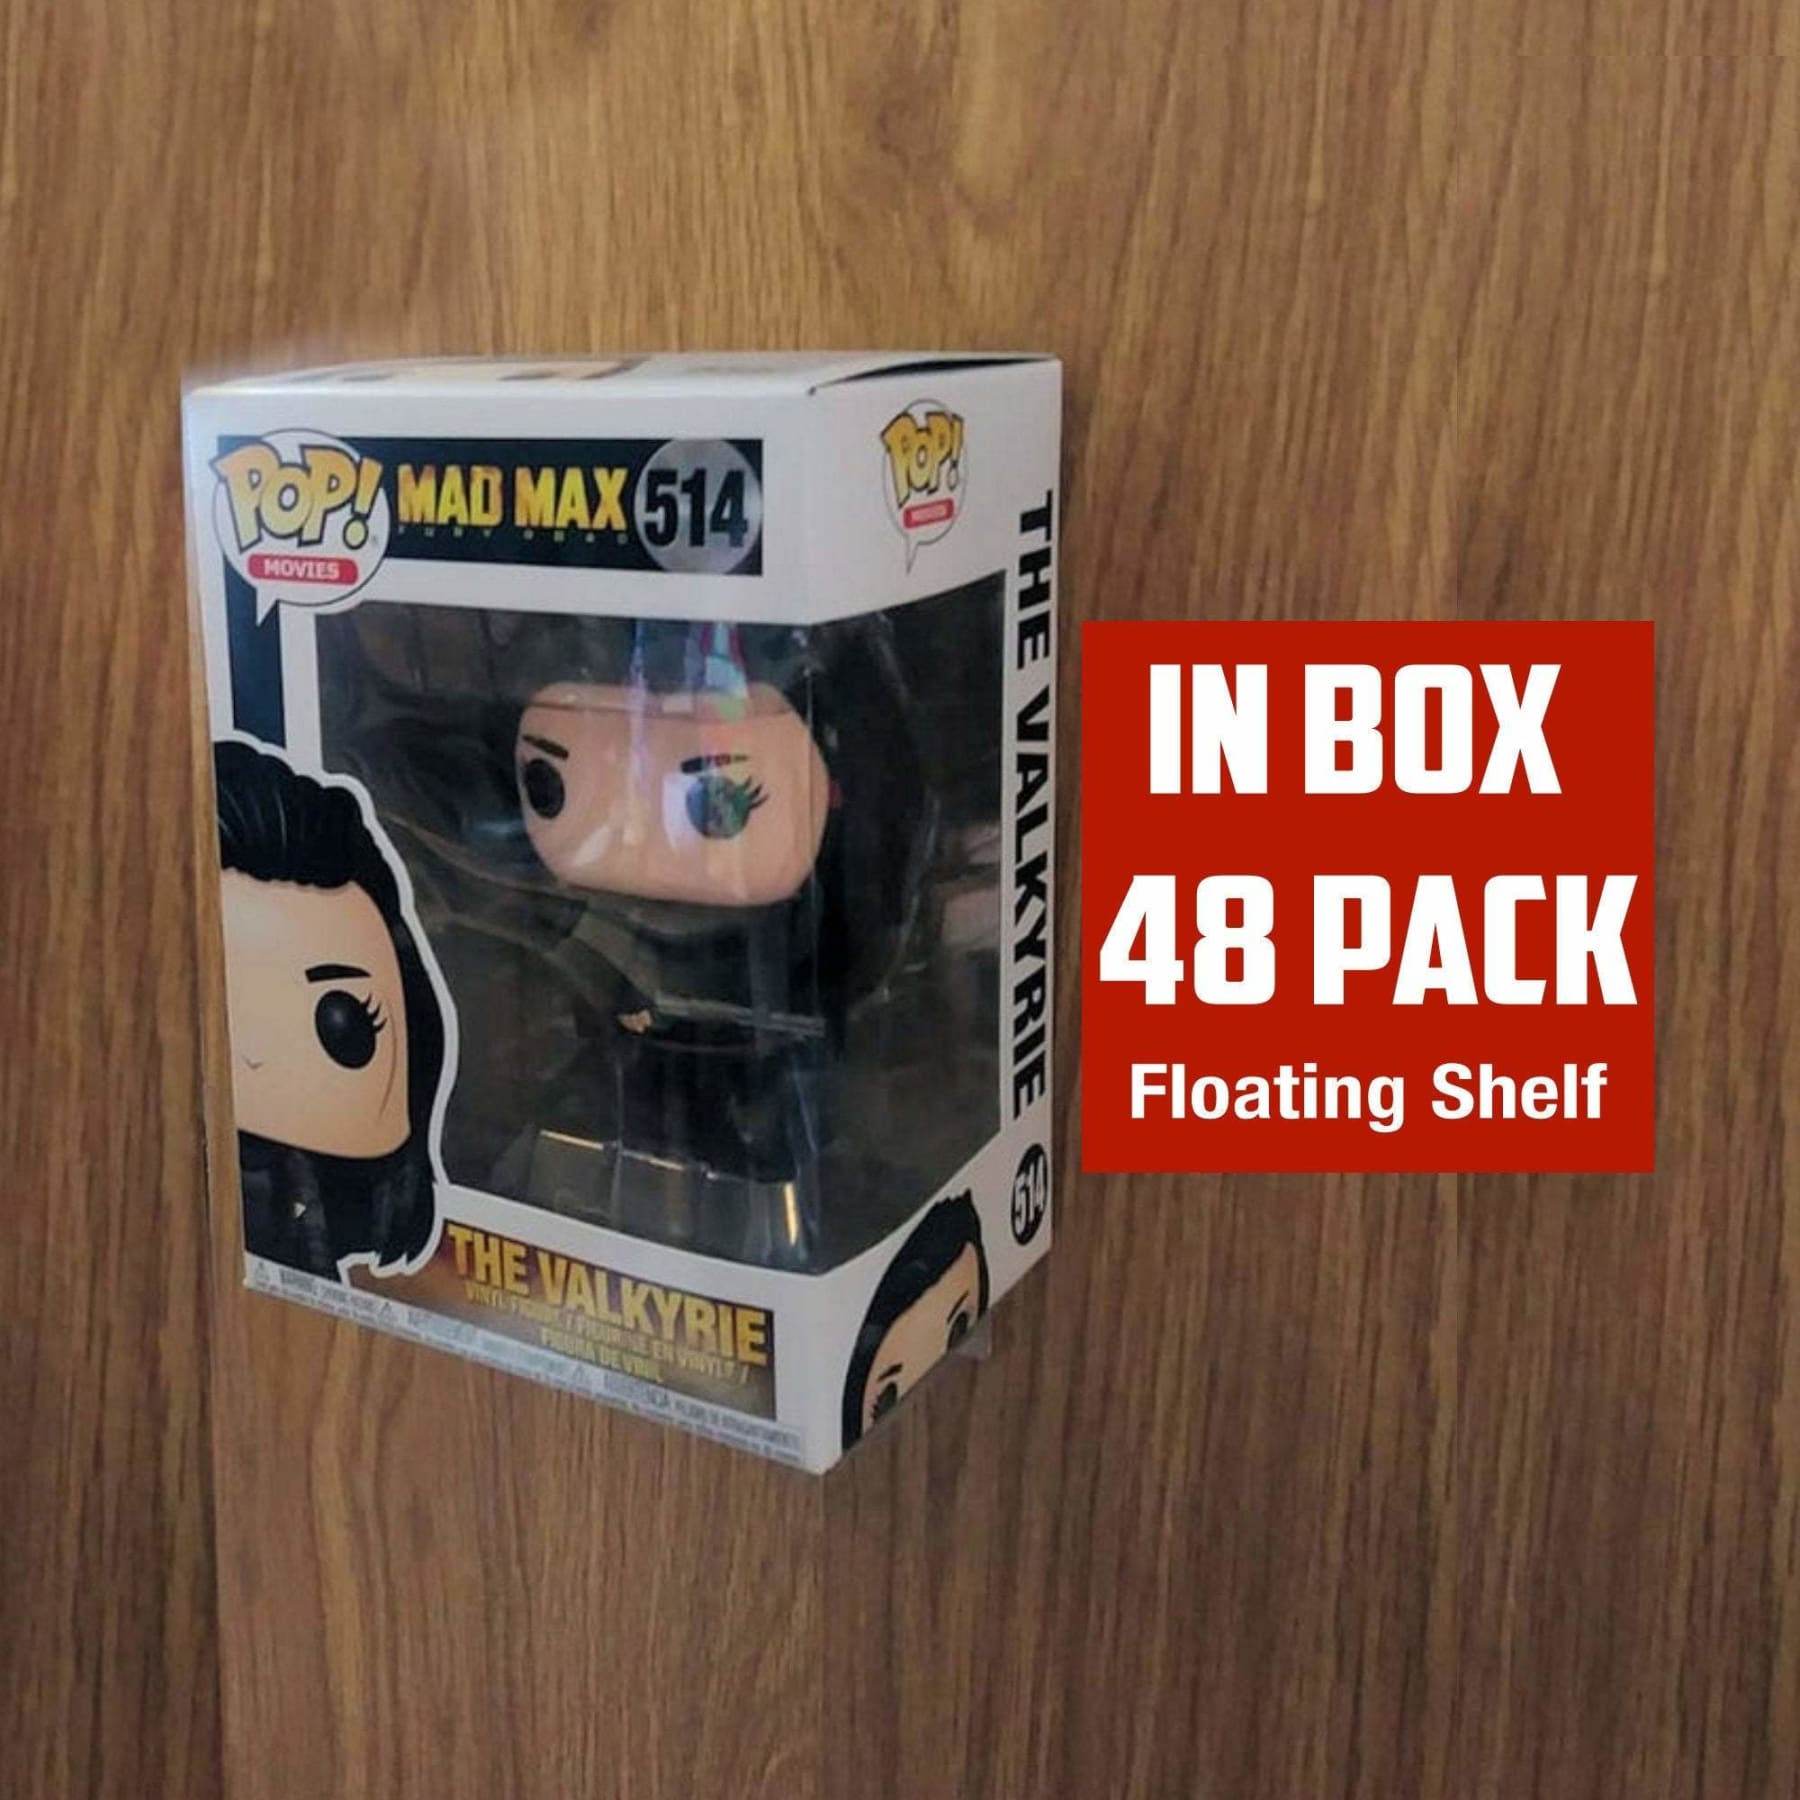 48 Pack For Boxed Funko Pop Vinyl: Clear Acrylic Wall Stand, Stick On, Single Floating Shelf less, No Nails or Screws